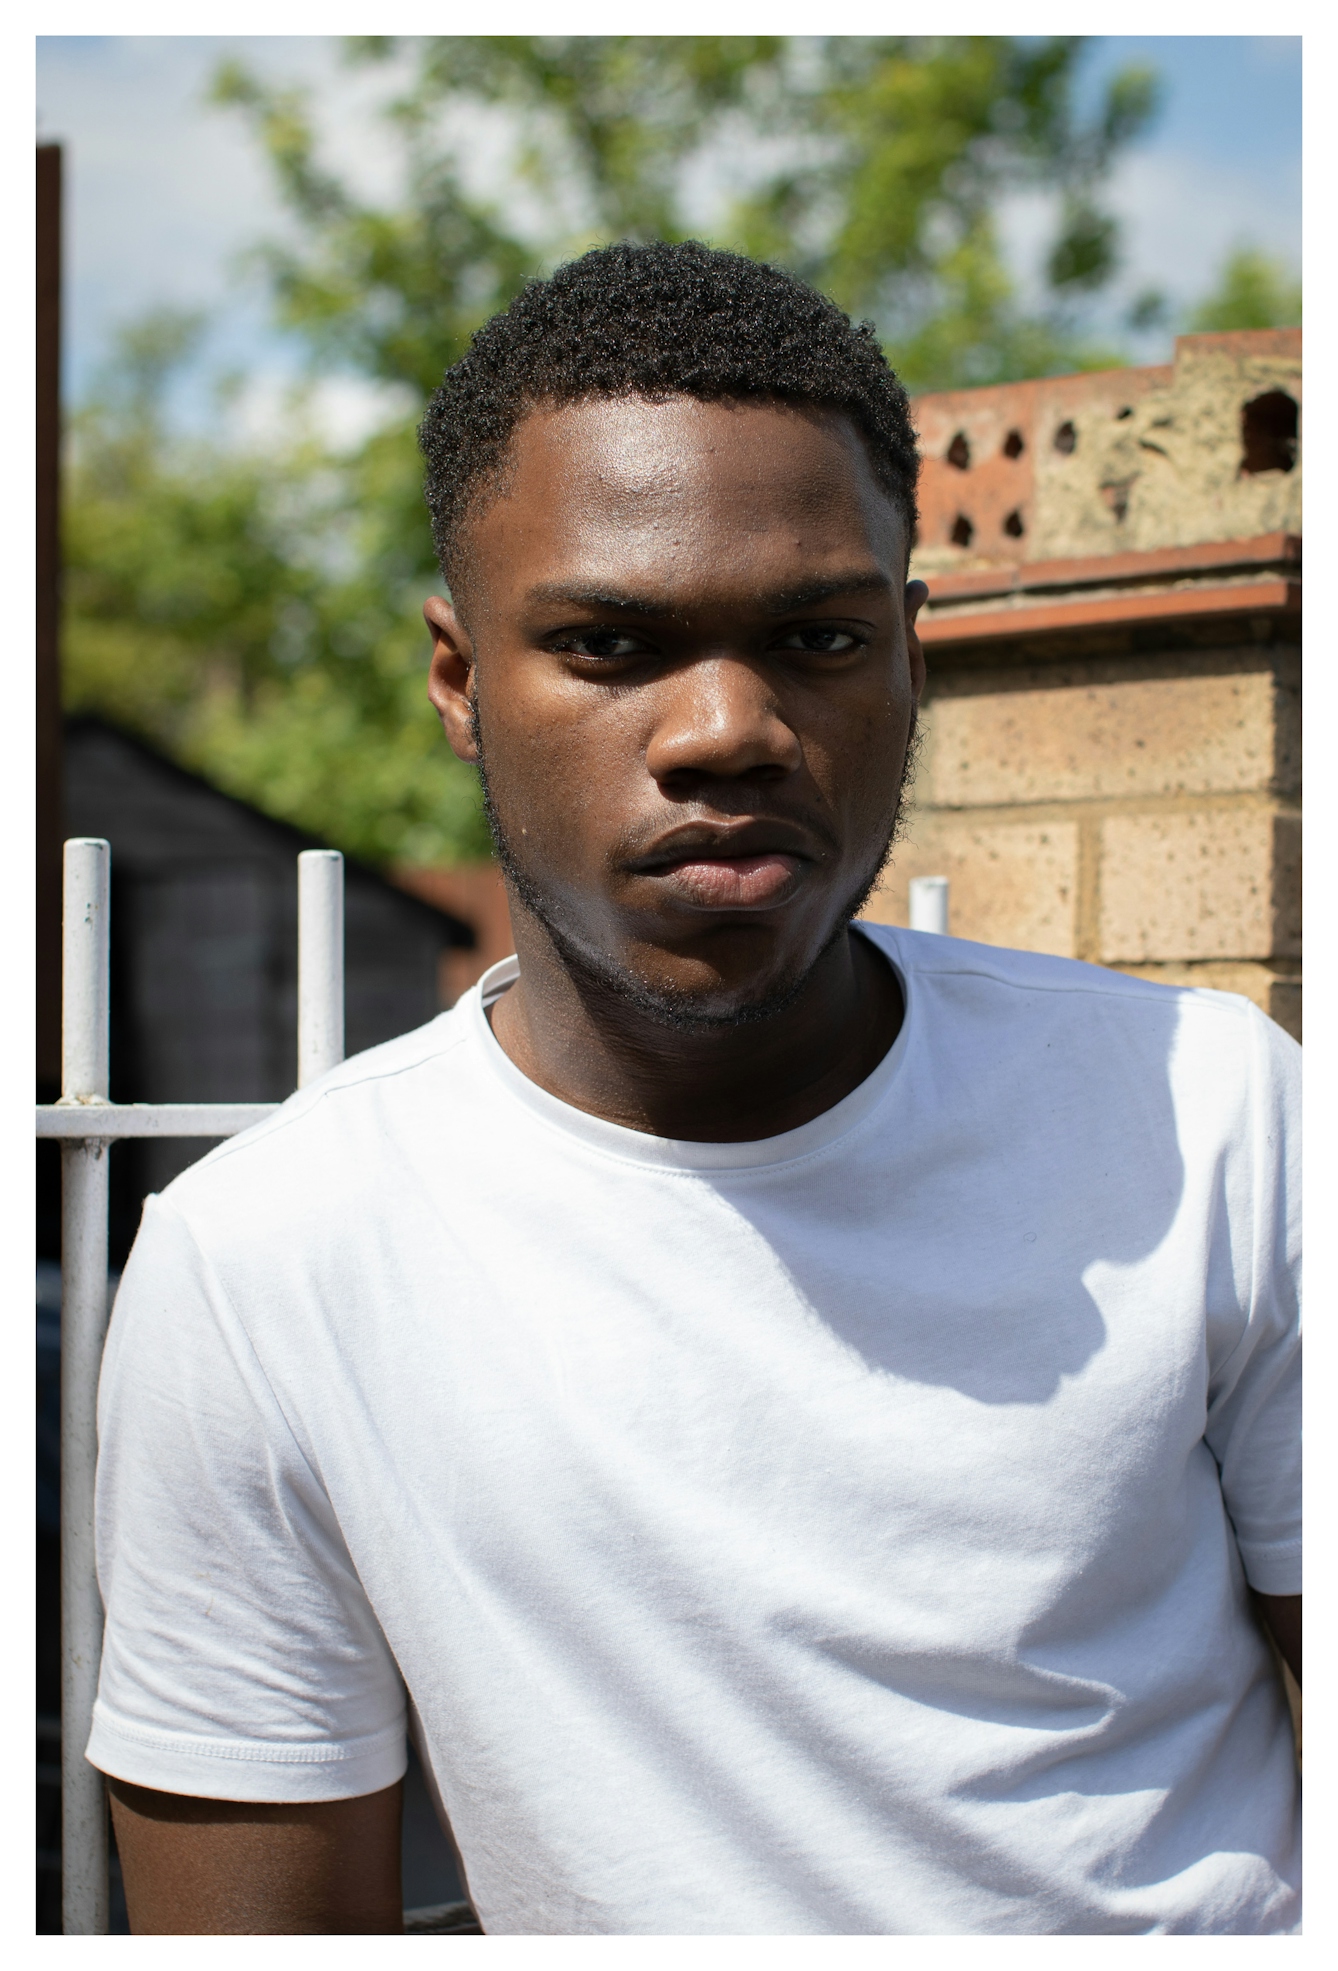 Photographic portrait of a young Black man wearing a white t-shirt. He is looking to camera leaning slightly on his right arm. He has a neutral but engaging expression. Behind him are out-of-focus elements of a garden scene.